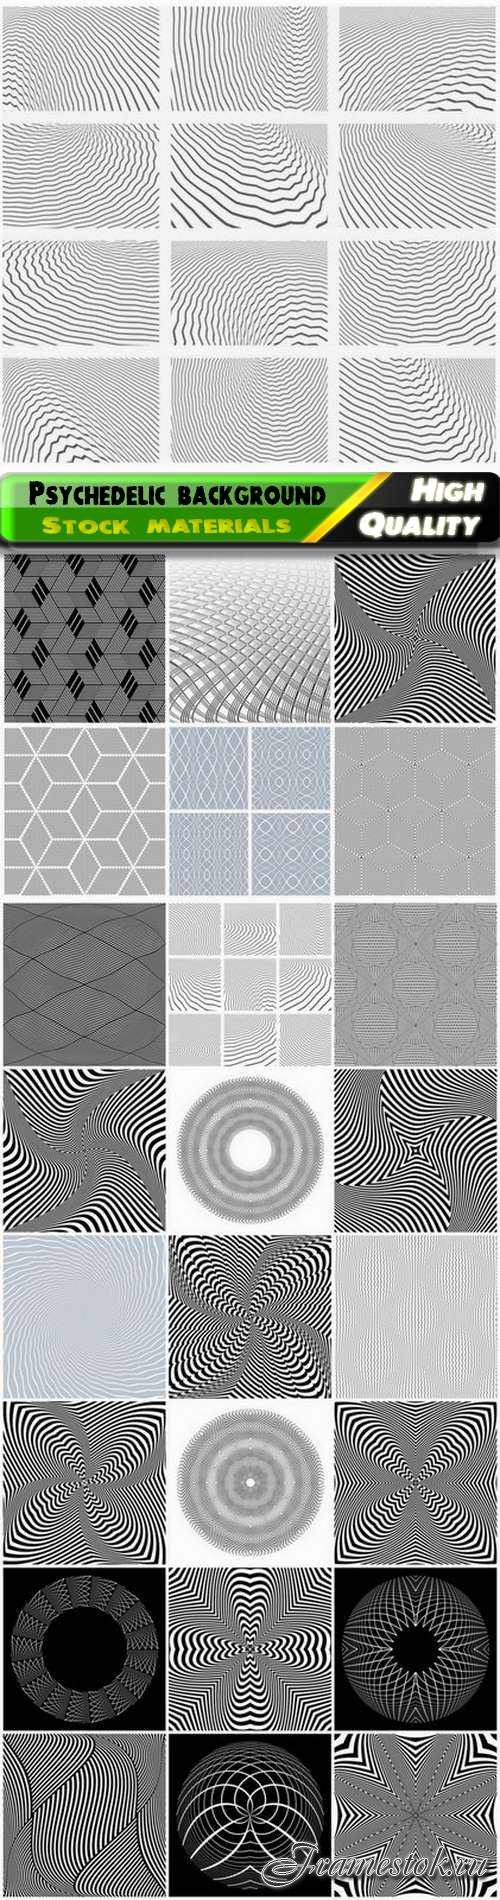 Abstract linear psychedelic background with optical illusion 25 Eps